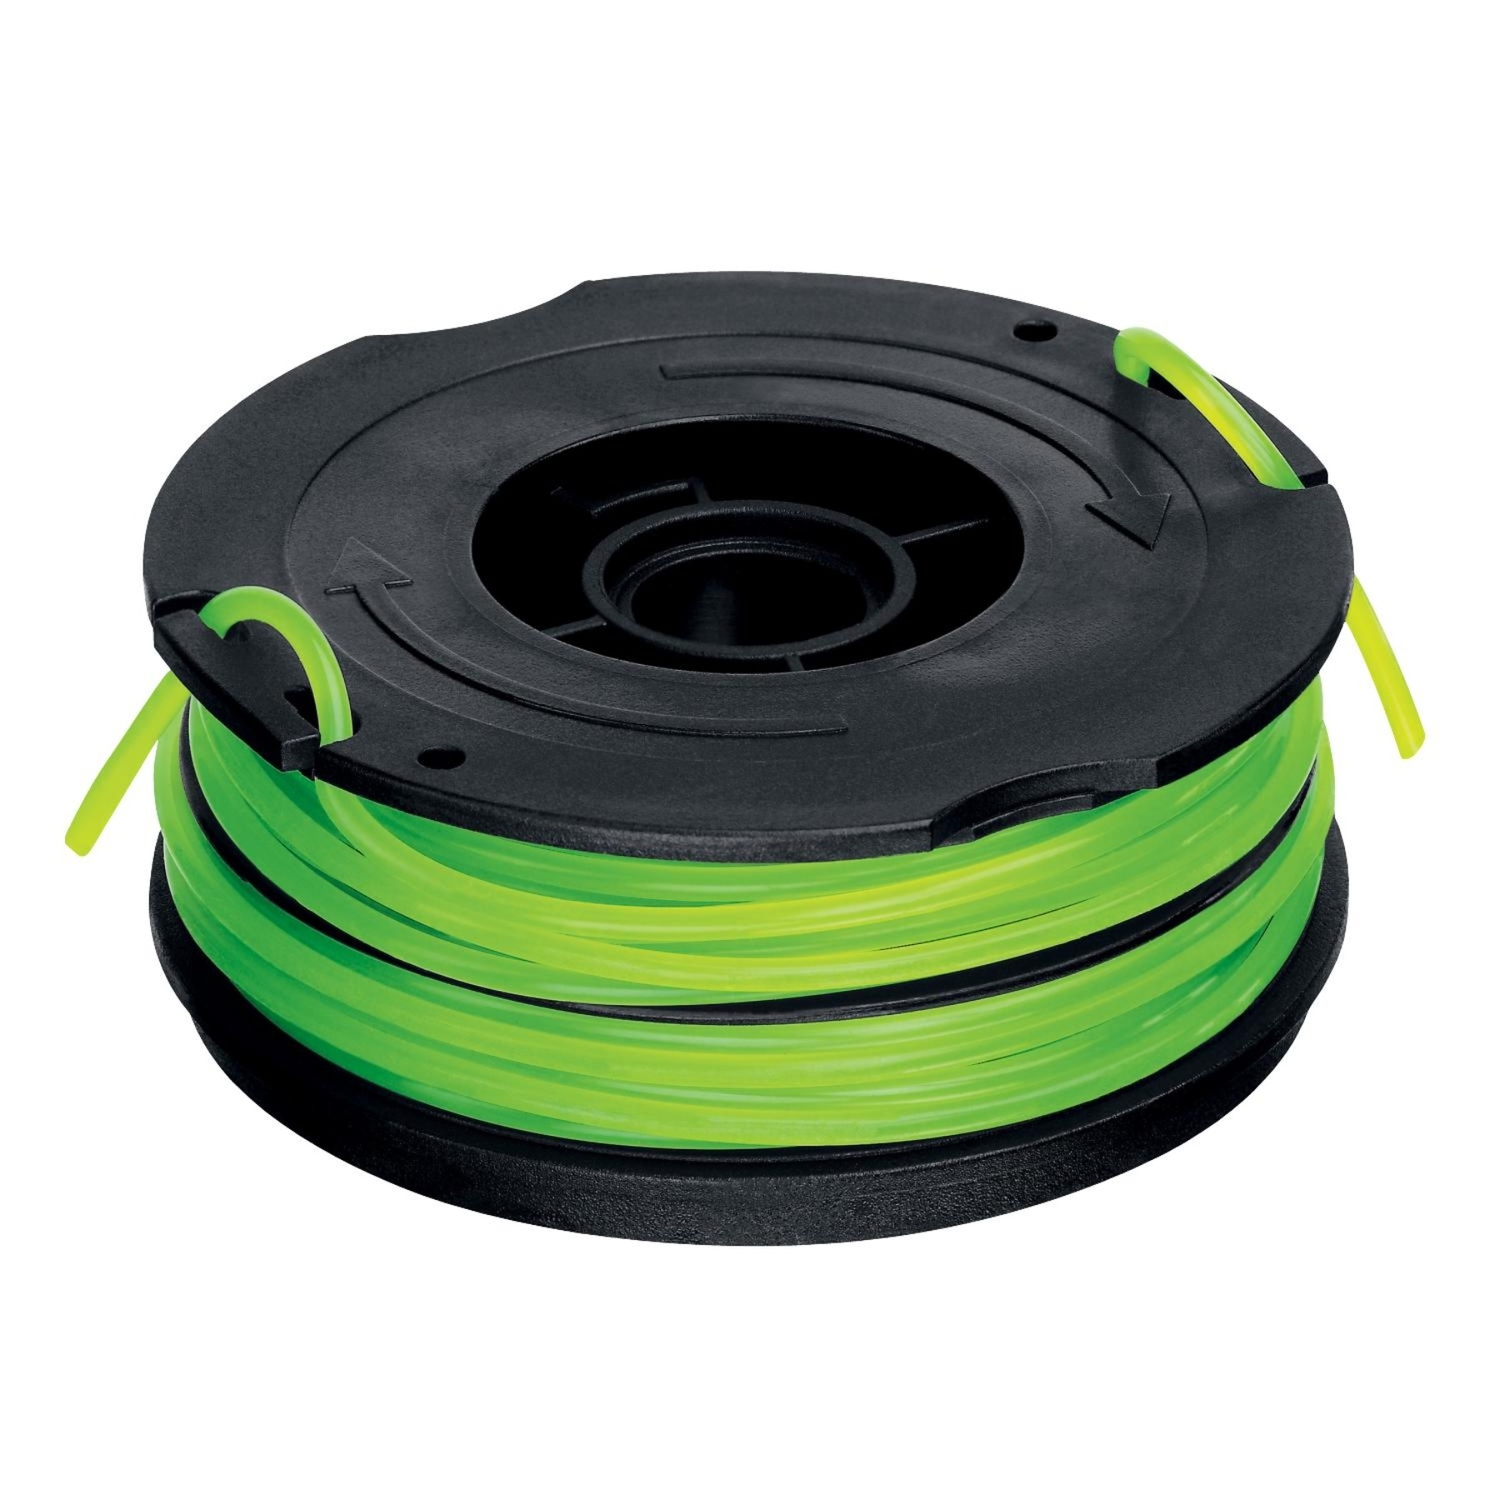 Black+Decker 0.065 in. D X 20 ft. L Replacement Line Trimmer Spool - Ace  Hardware